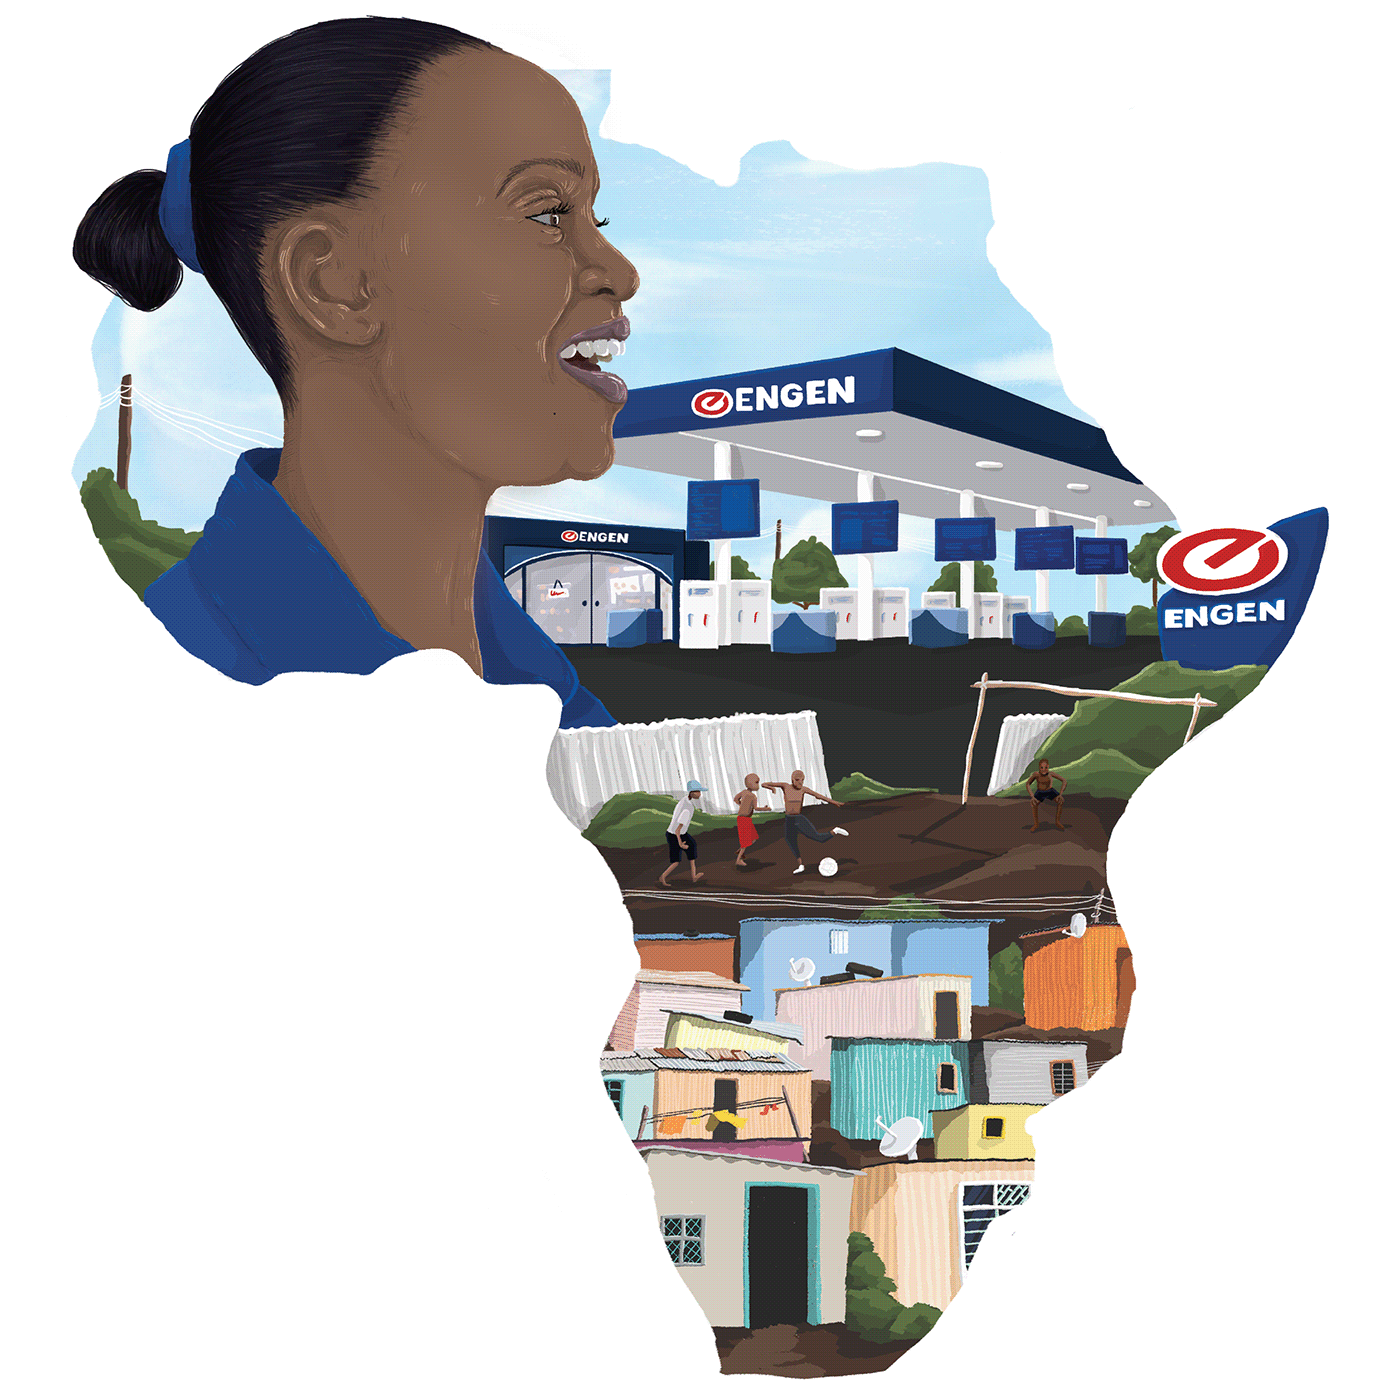 Mural painting   Community upliftment design 35 africa portrait Proudly South African petrol station ILLUSTRATION  narrative